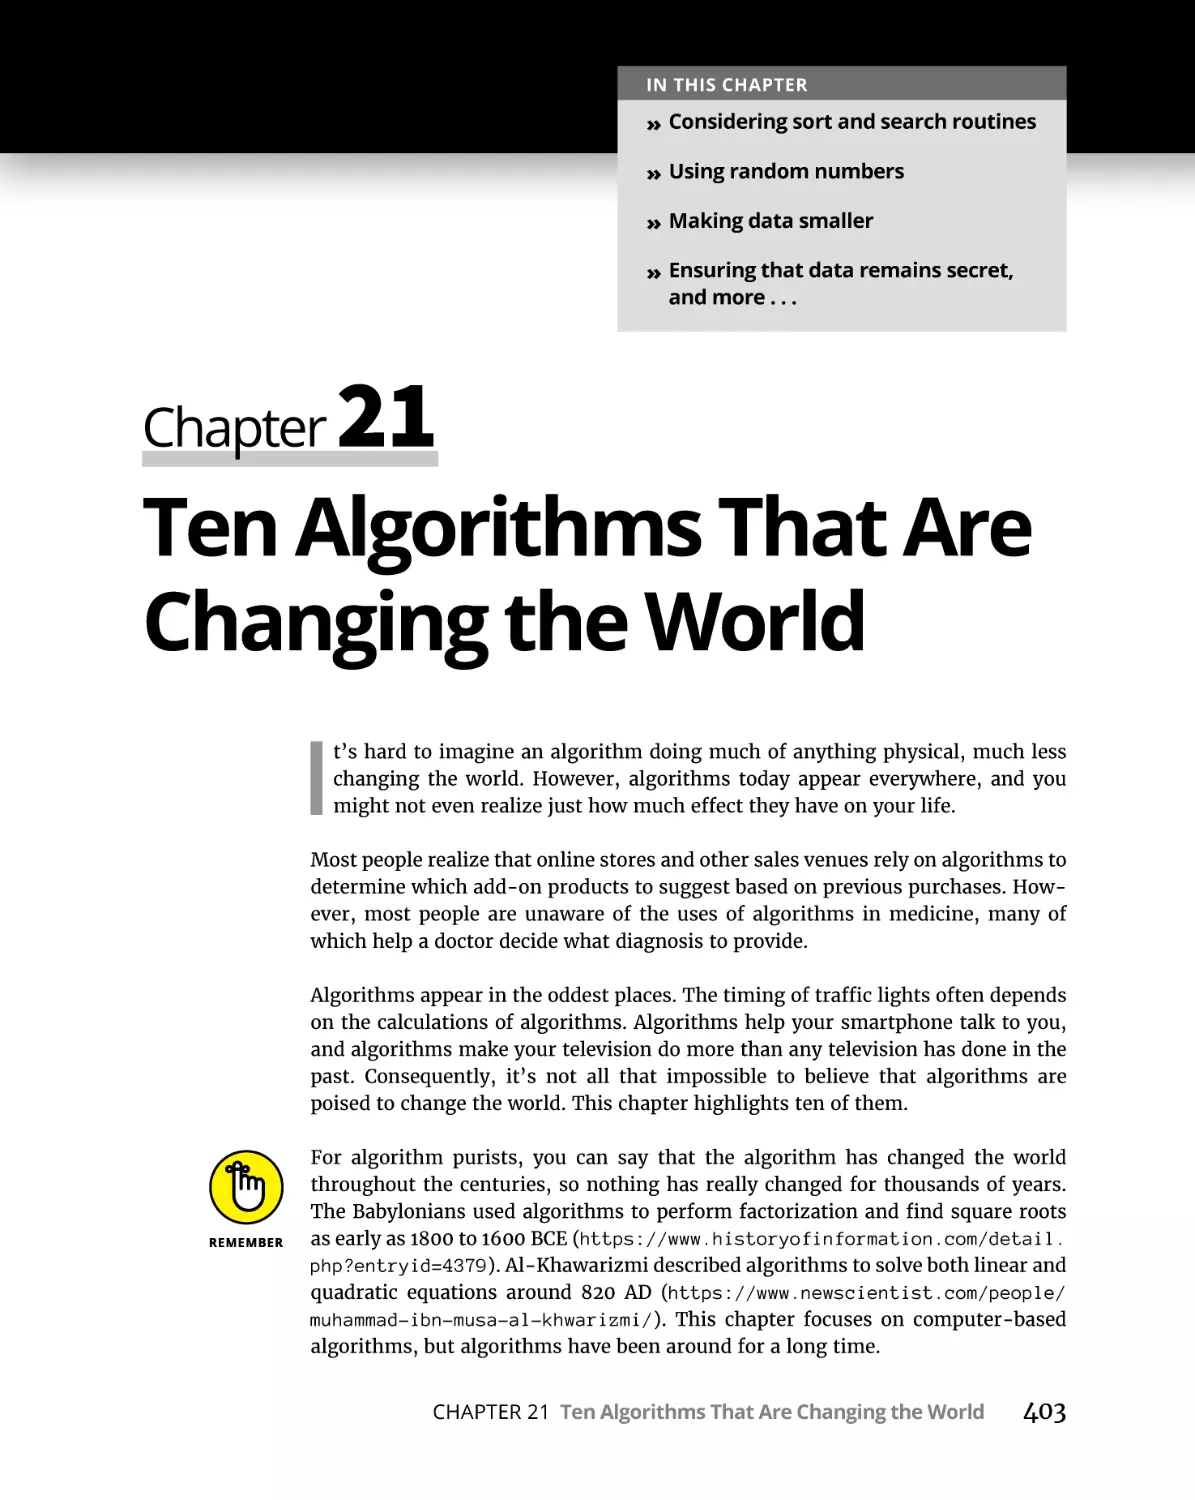 Chapter 21 Ten Algorithms That Are Changing the World